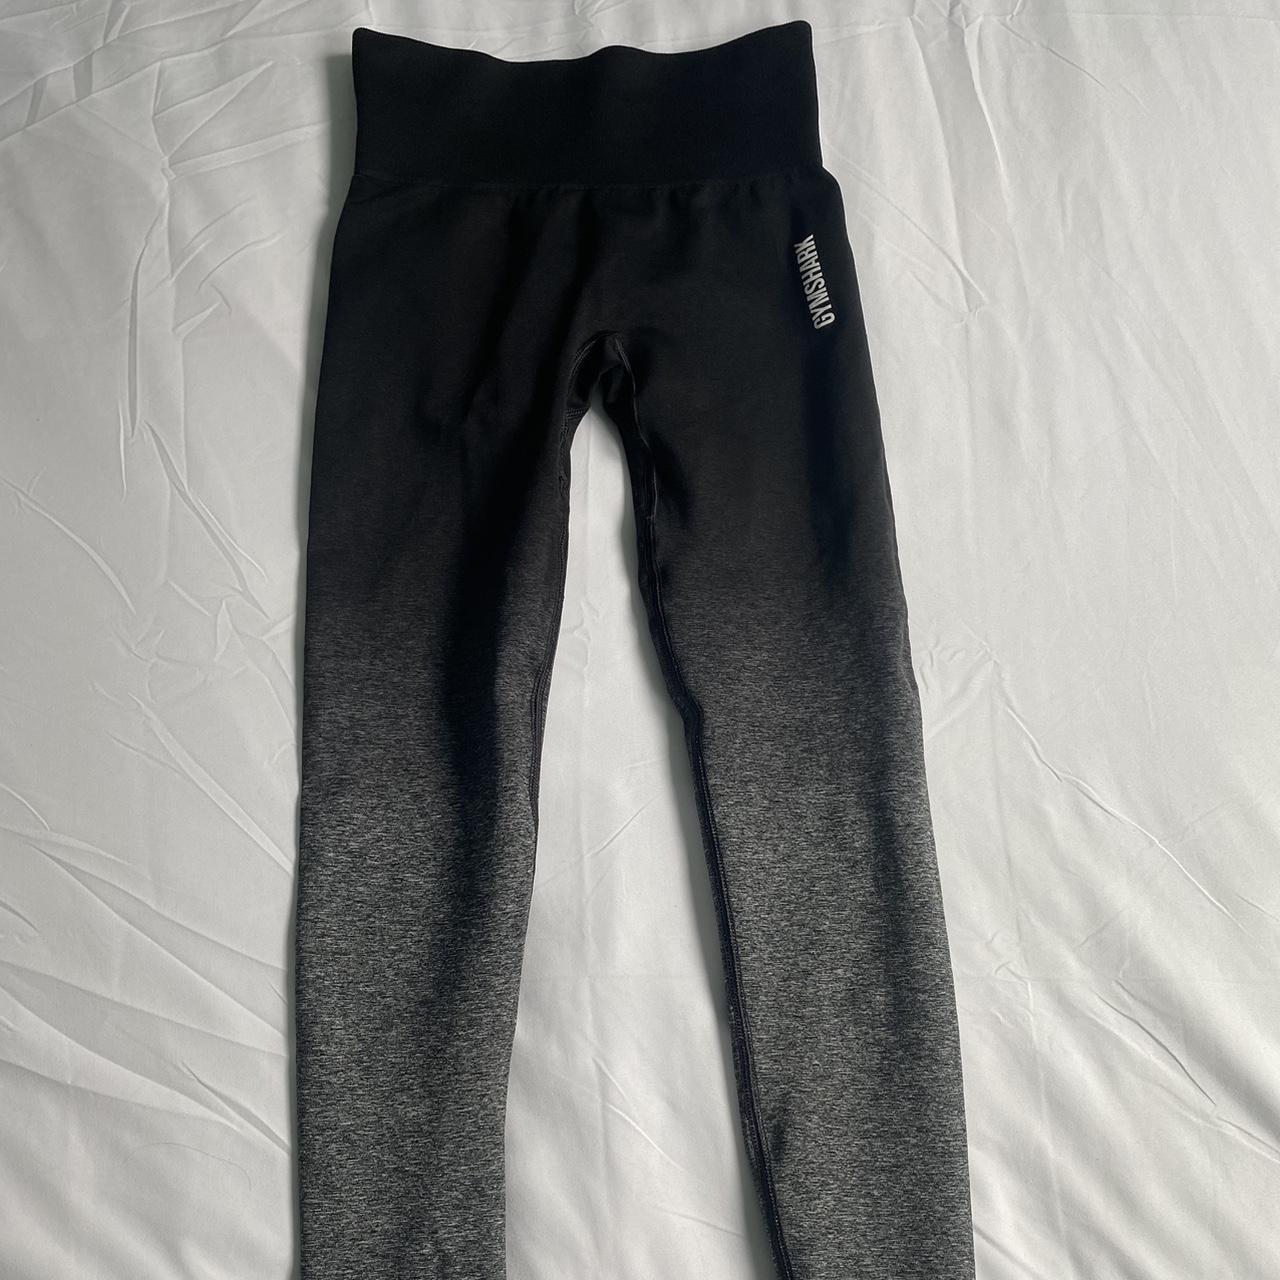 gymshark black and grey ombre seamless leggings, size